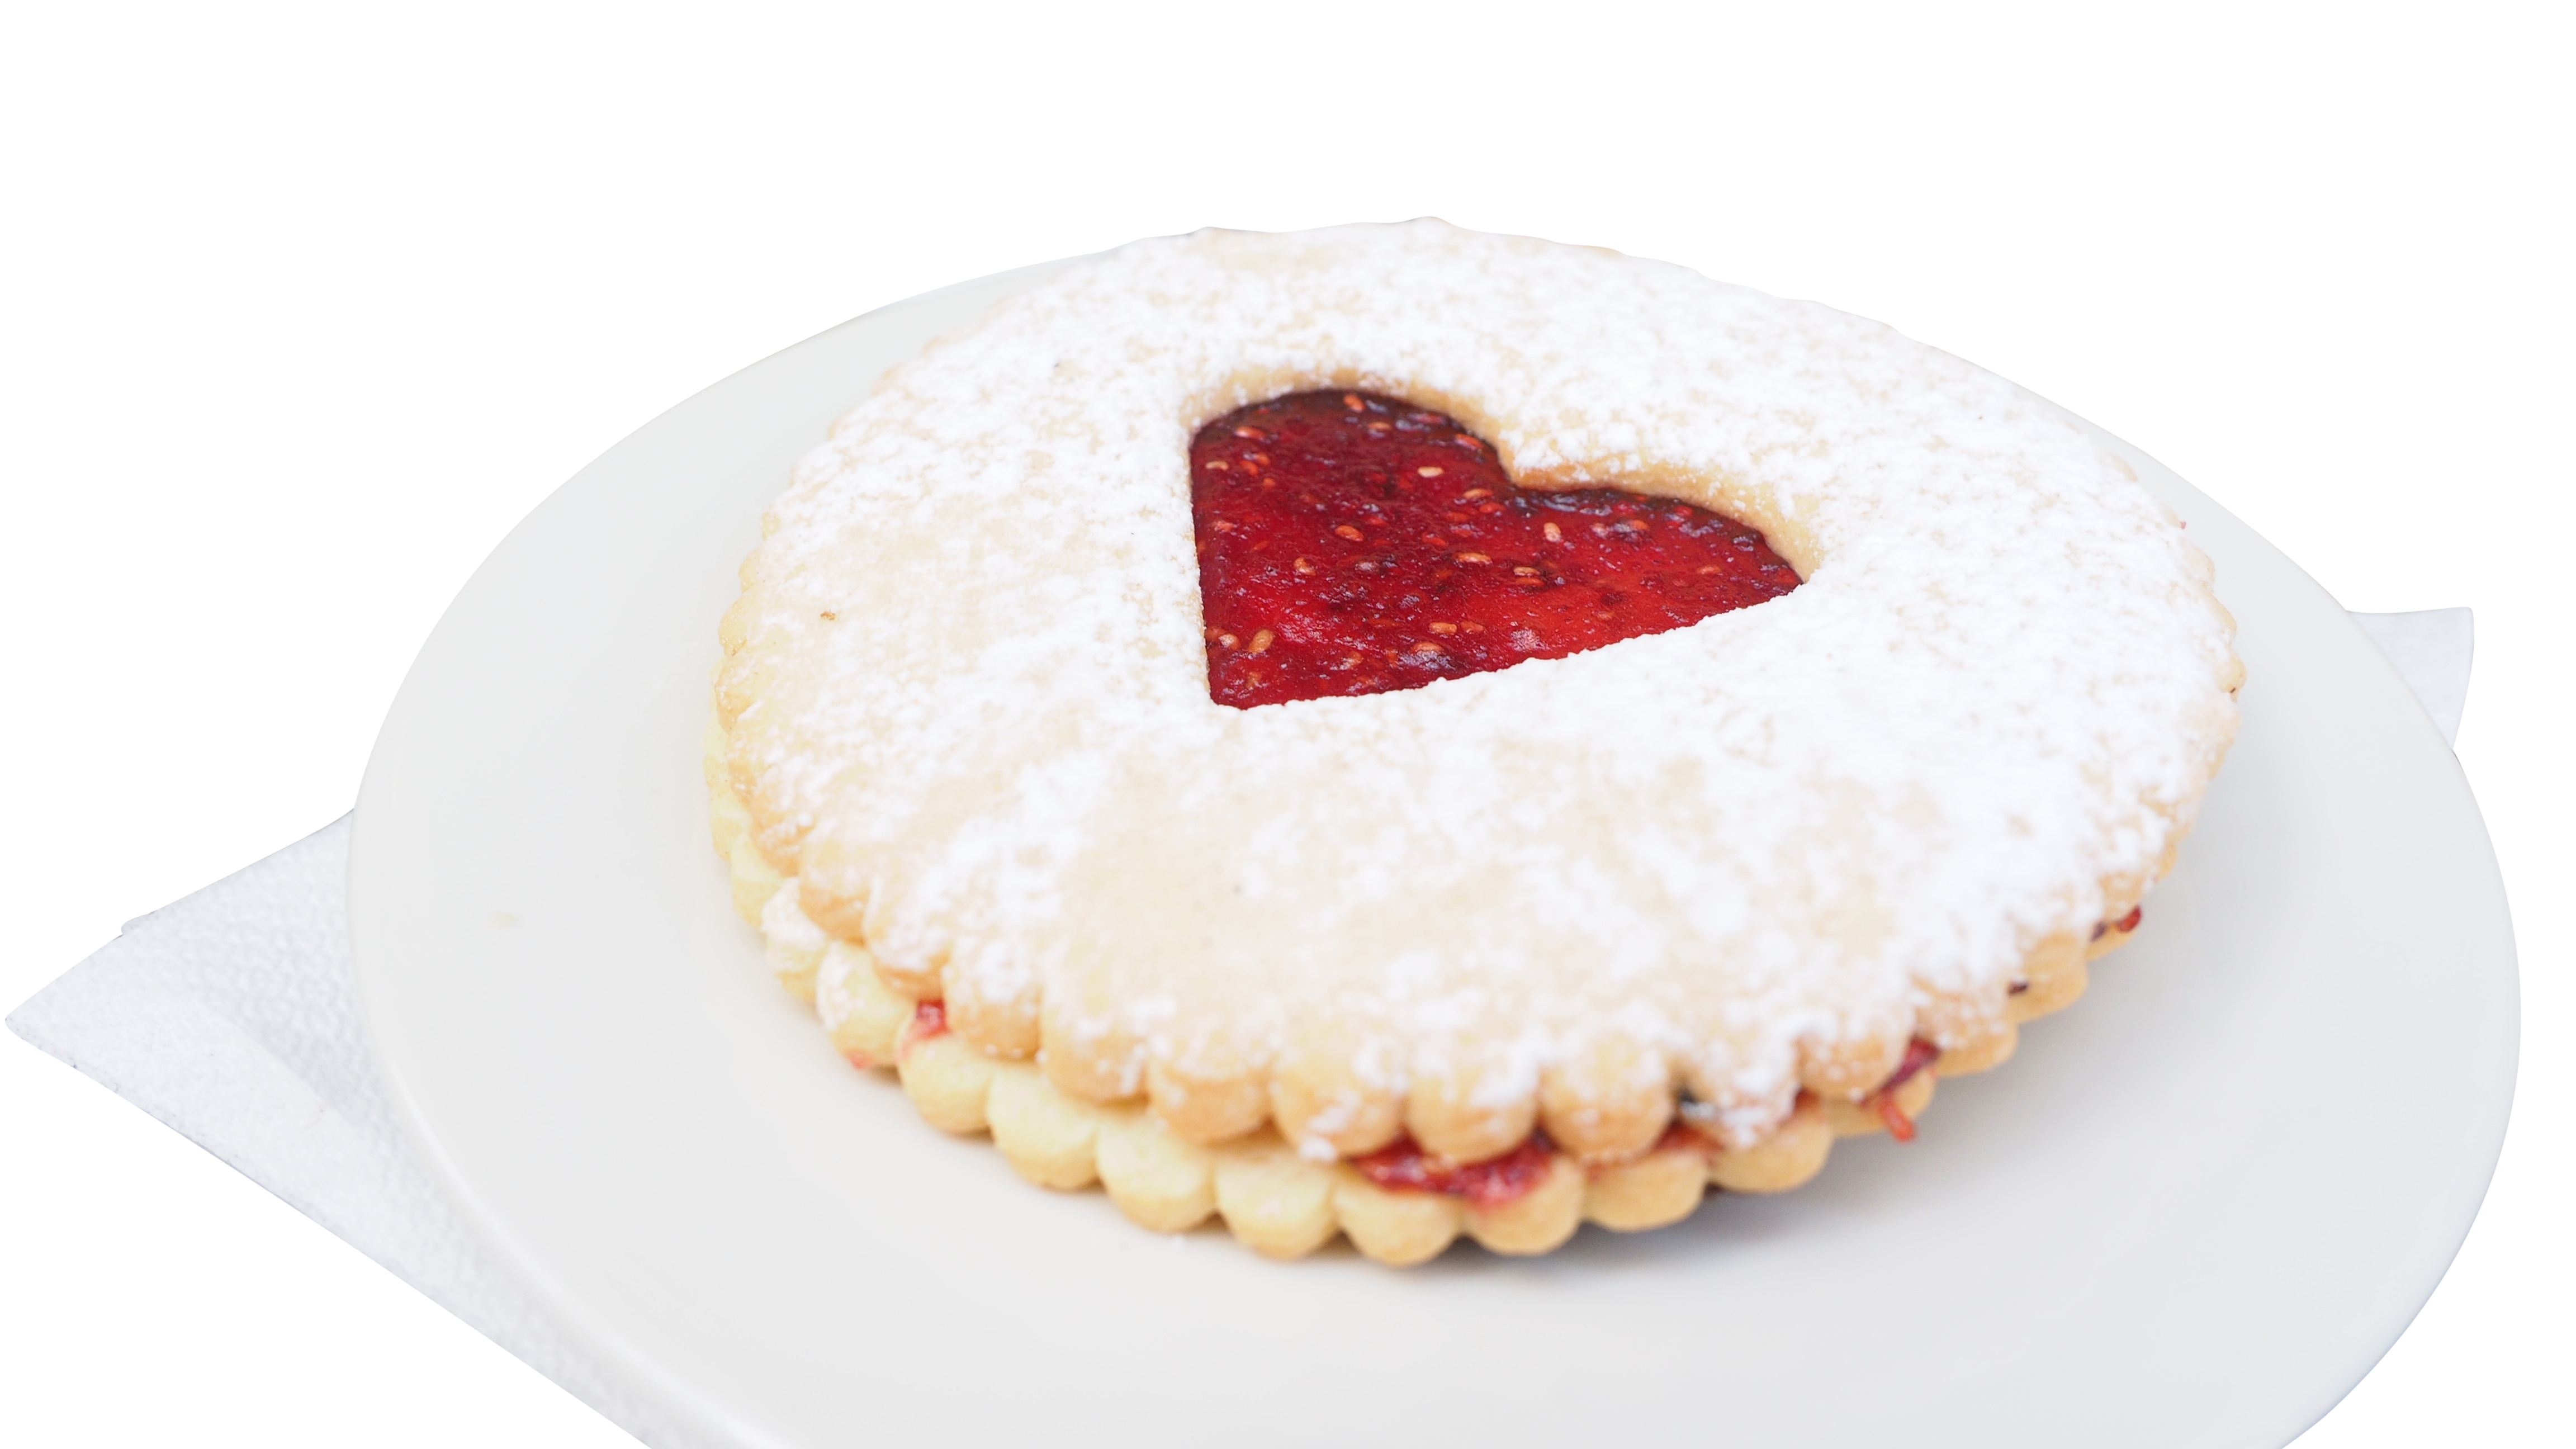 A Heart Shaped Cookie With A Jam Inside